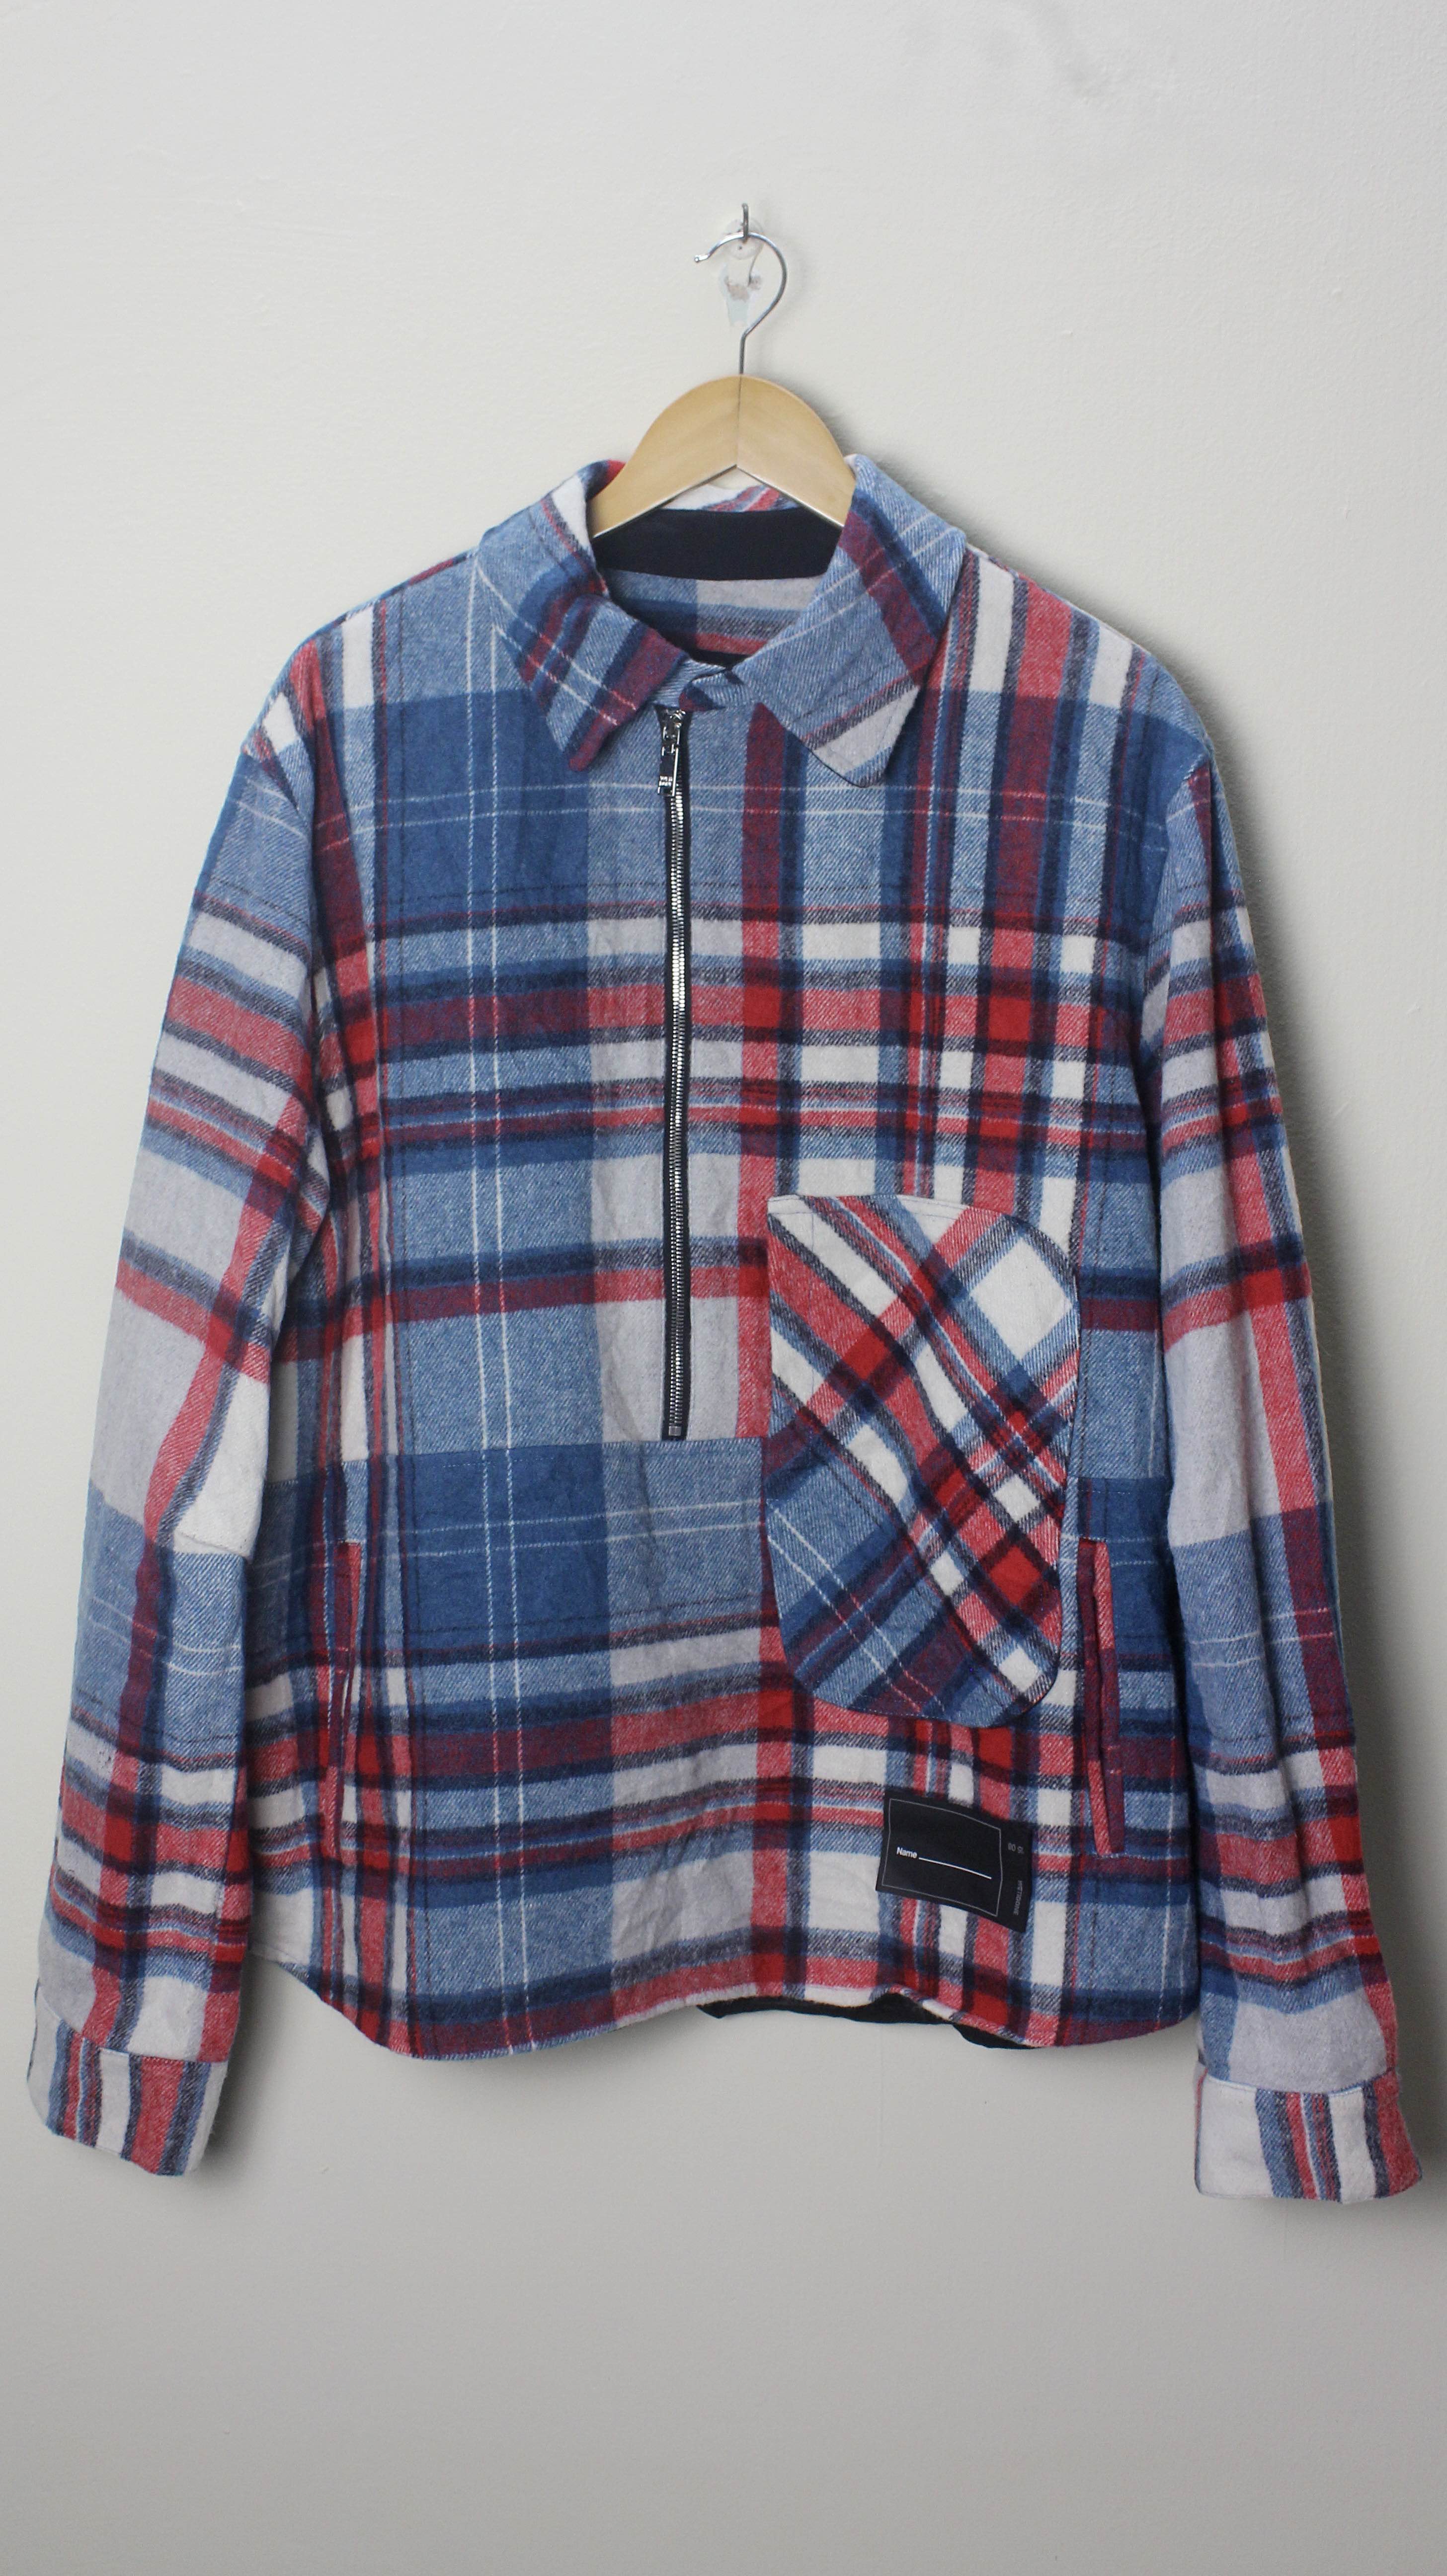 We11done - Checked Wool Shirt Multicolor Plaid Jacket Justin Bieber - 5